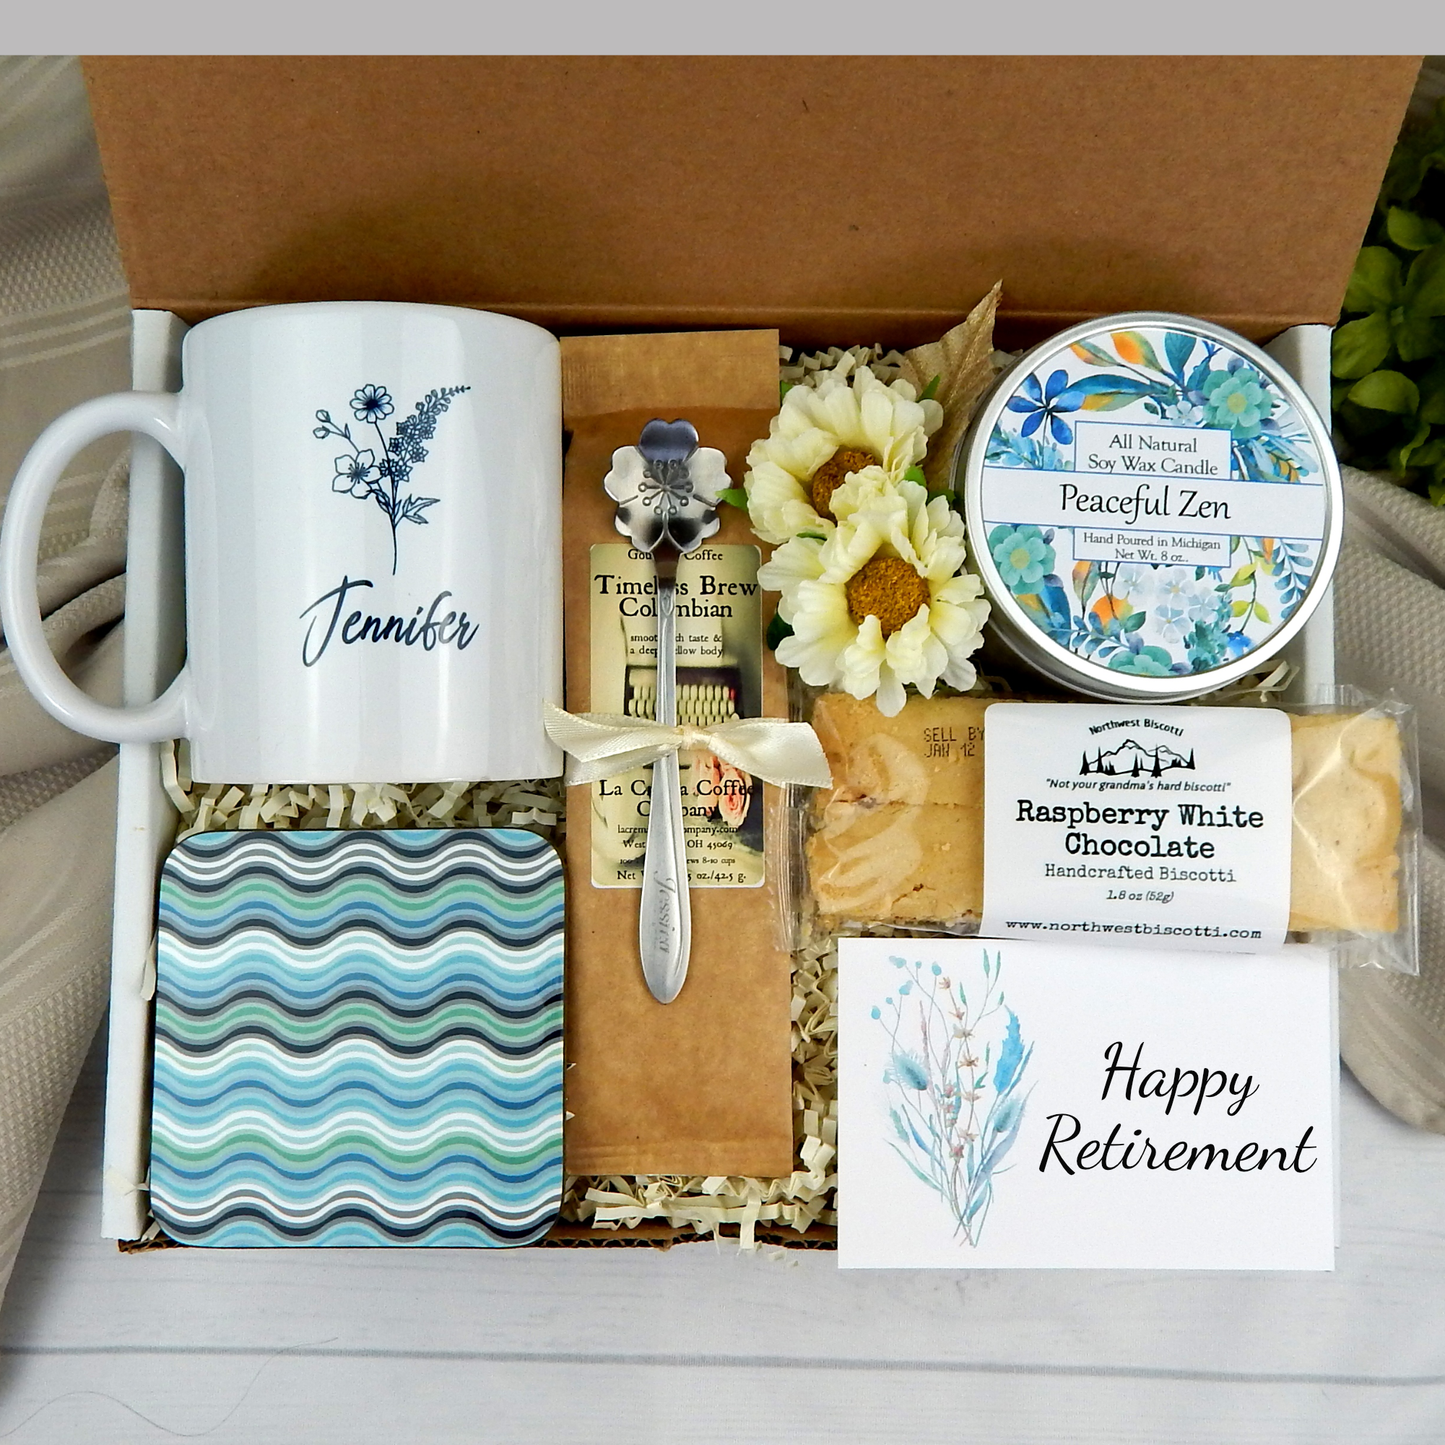 Retirement tranquility: Customized mug, coffee, and treats in a retirement gift basket for her.